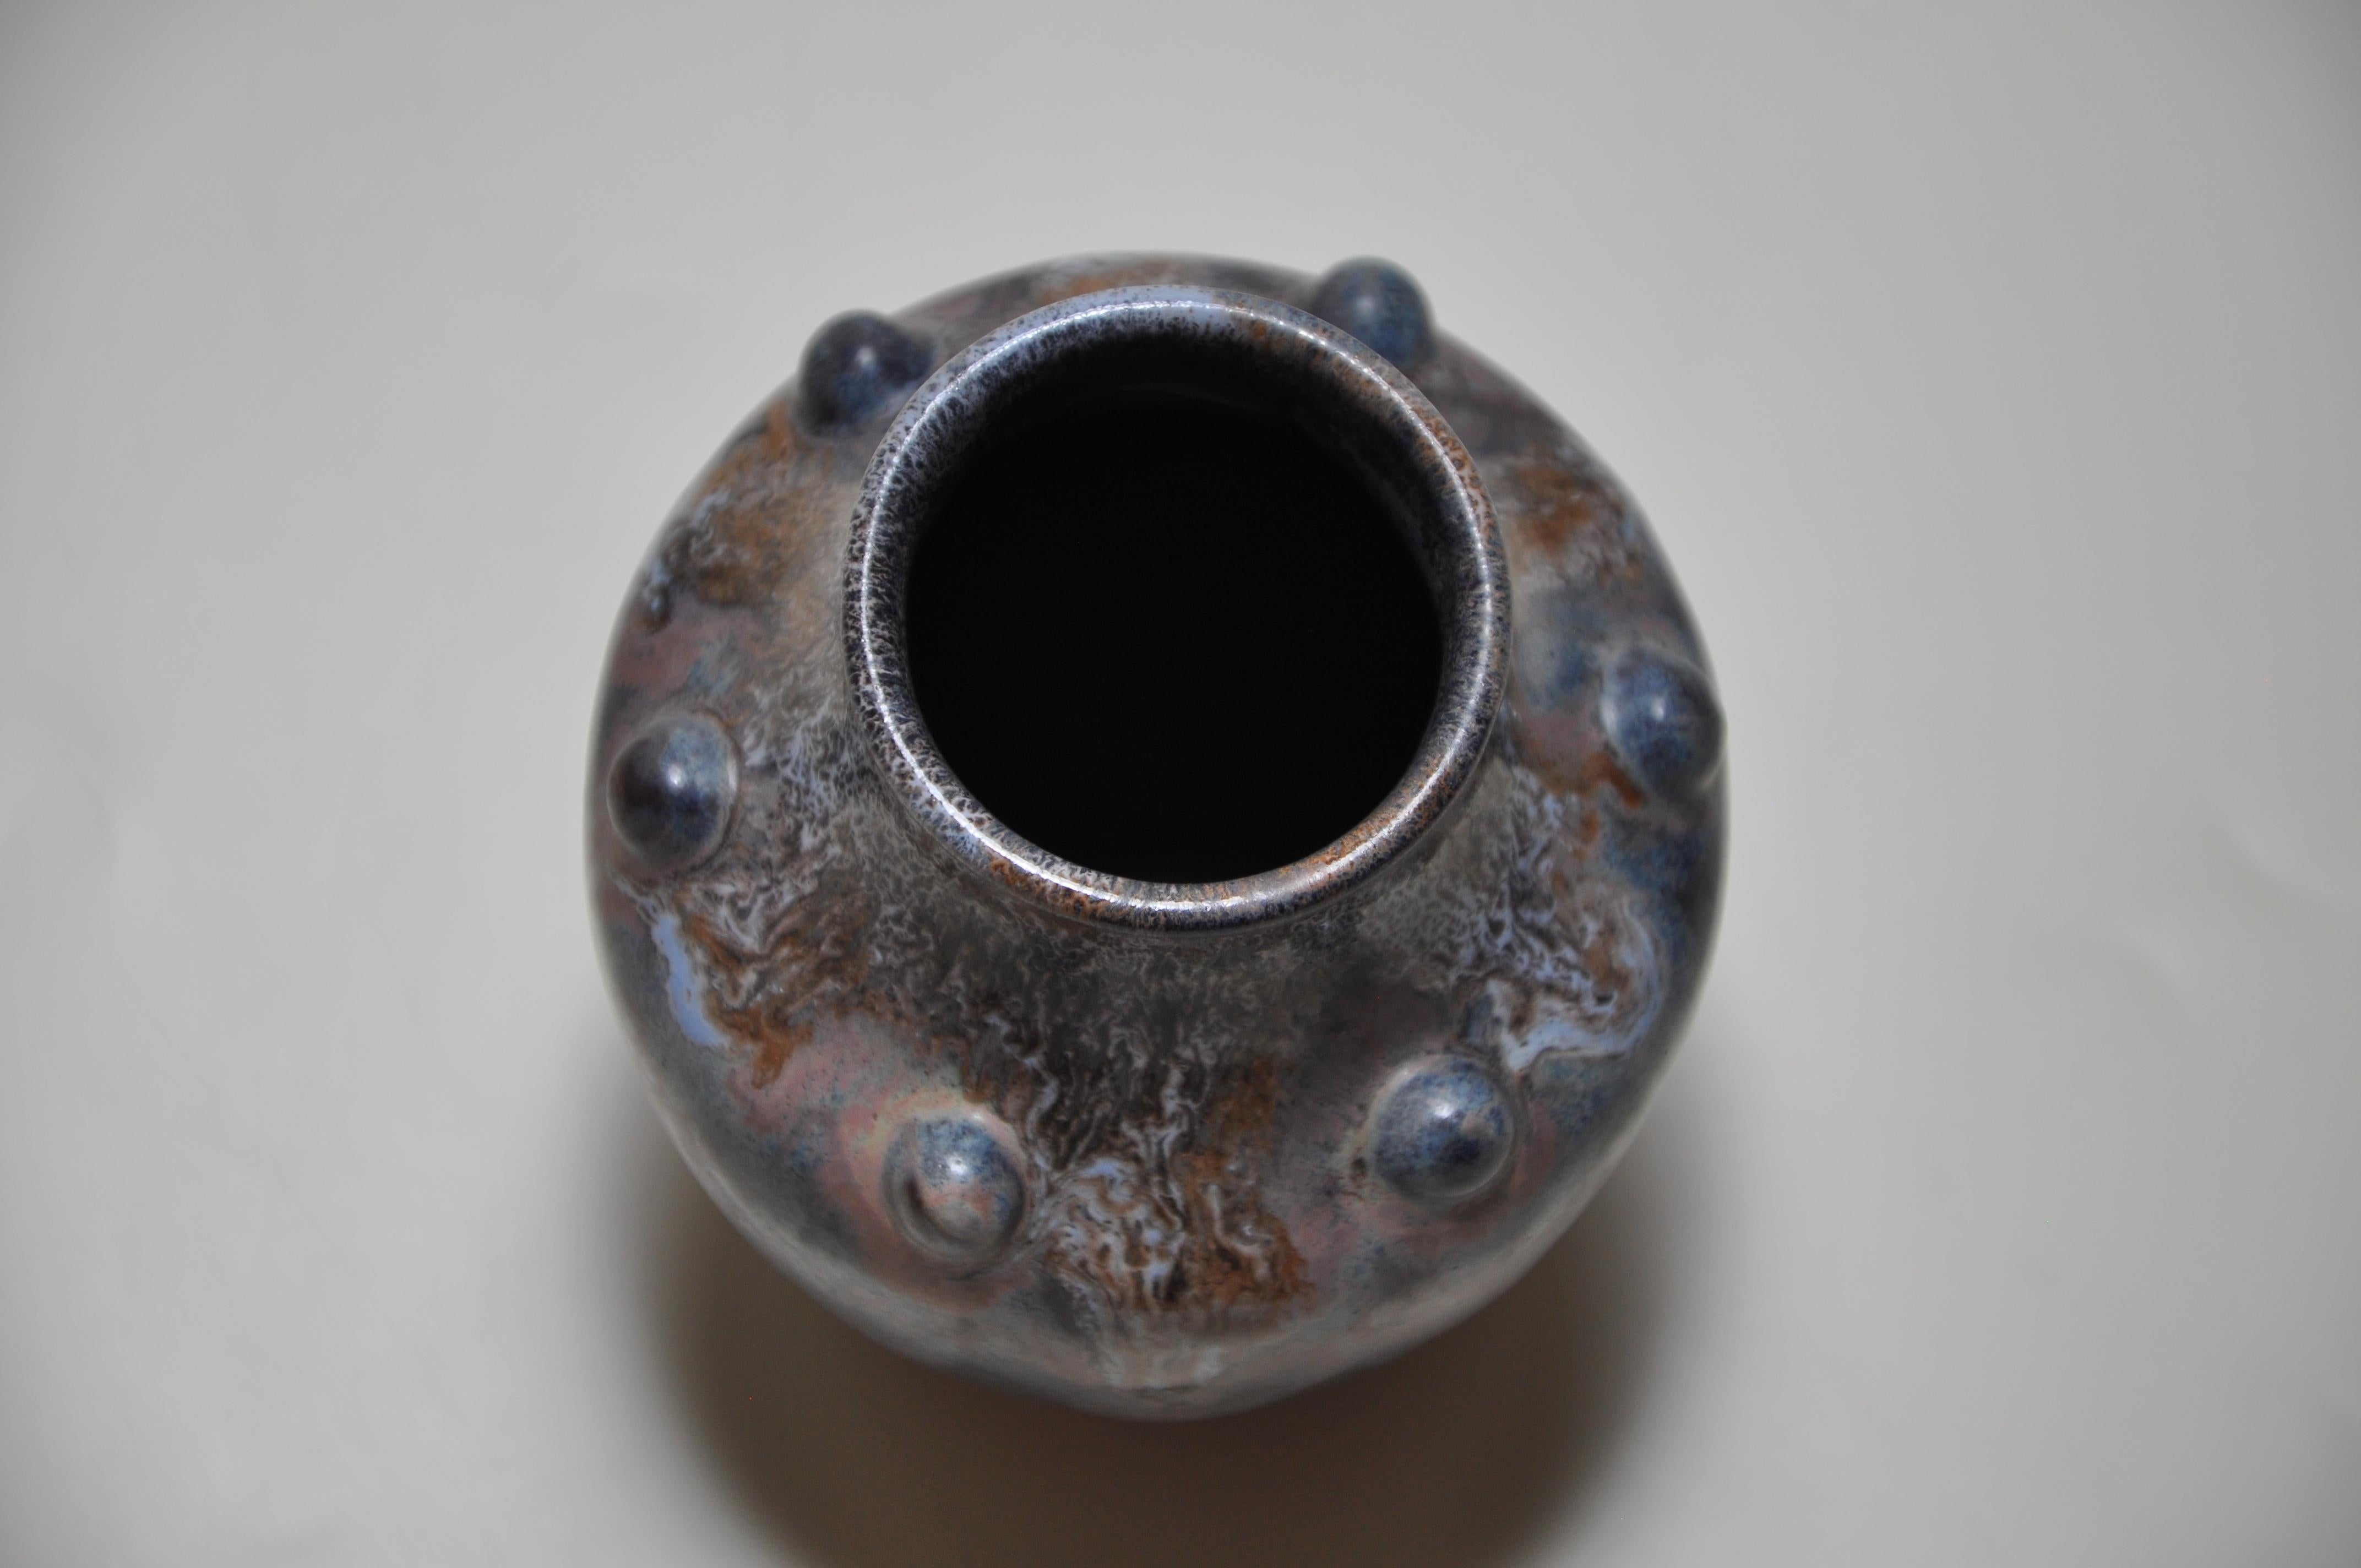 French Art Nouveau ceramic vase of shouldered ovoid form baring a row of raised nodules - French ‘points’ (nipples). 
Clearly by Influenced Auguste Delaherche’s use of similar motifs. 
This vase bares the incised signature of Jean Baptiste